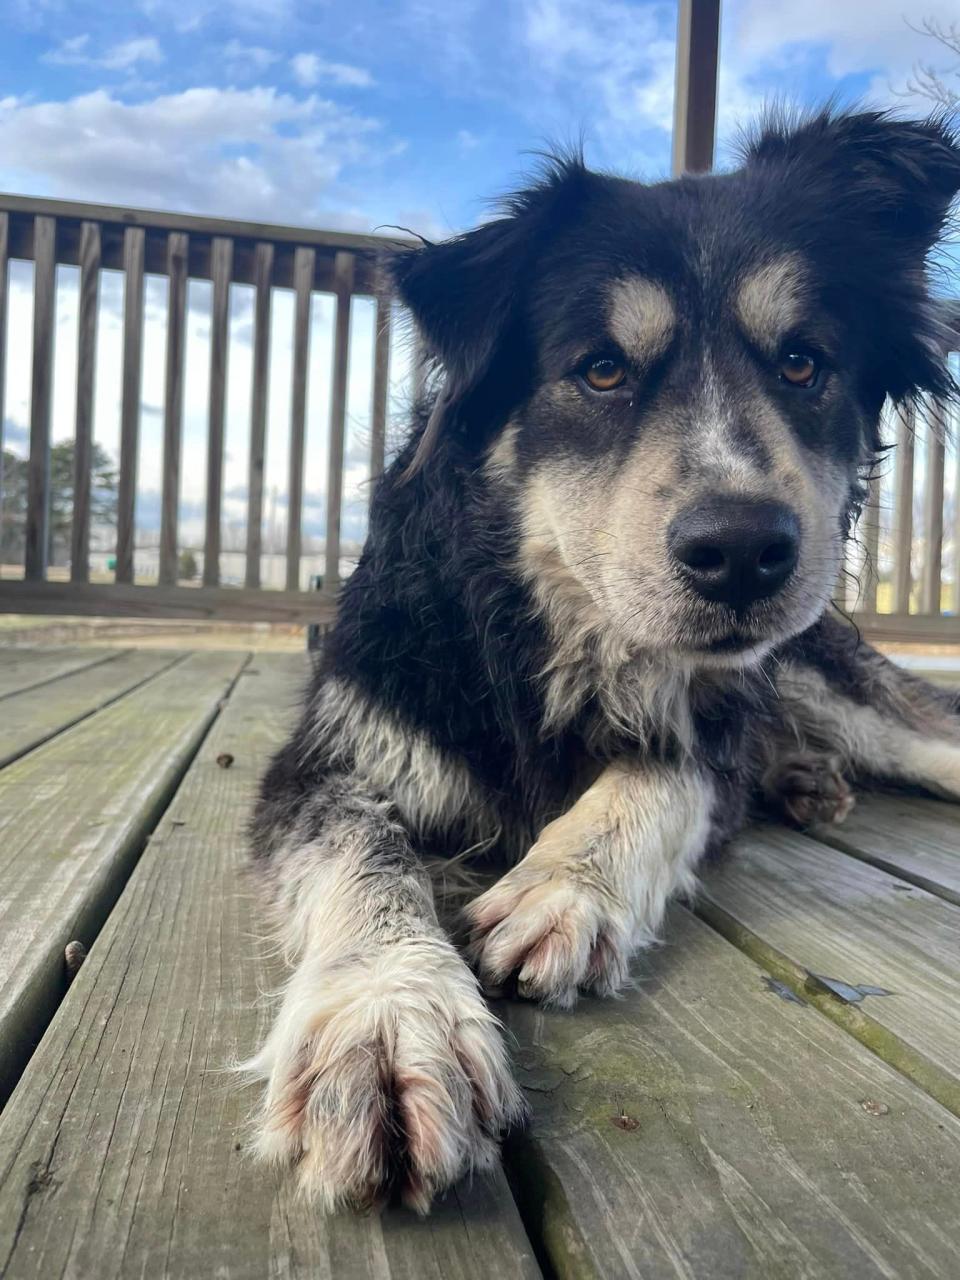 Pawl Ruff, whose real name is Waffle House, is a 2-year-old, 65 pound, Australian Shepherd mix who resembles Ant-Man actor Paul Rudd. Now, the shelter thinks Paul Rudd should adopt his lookalike.